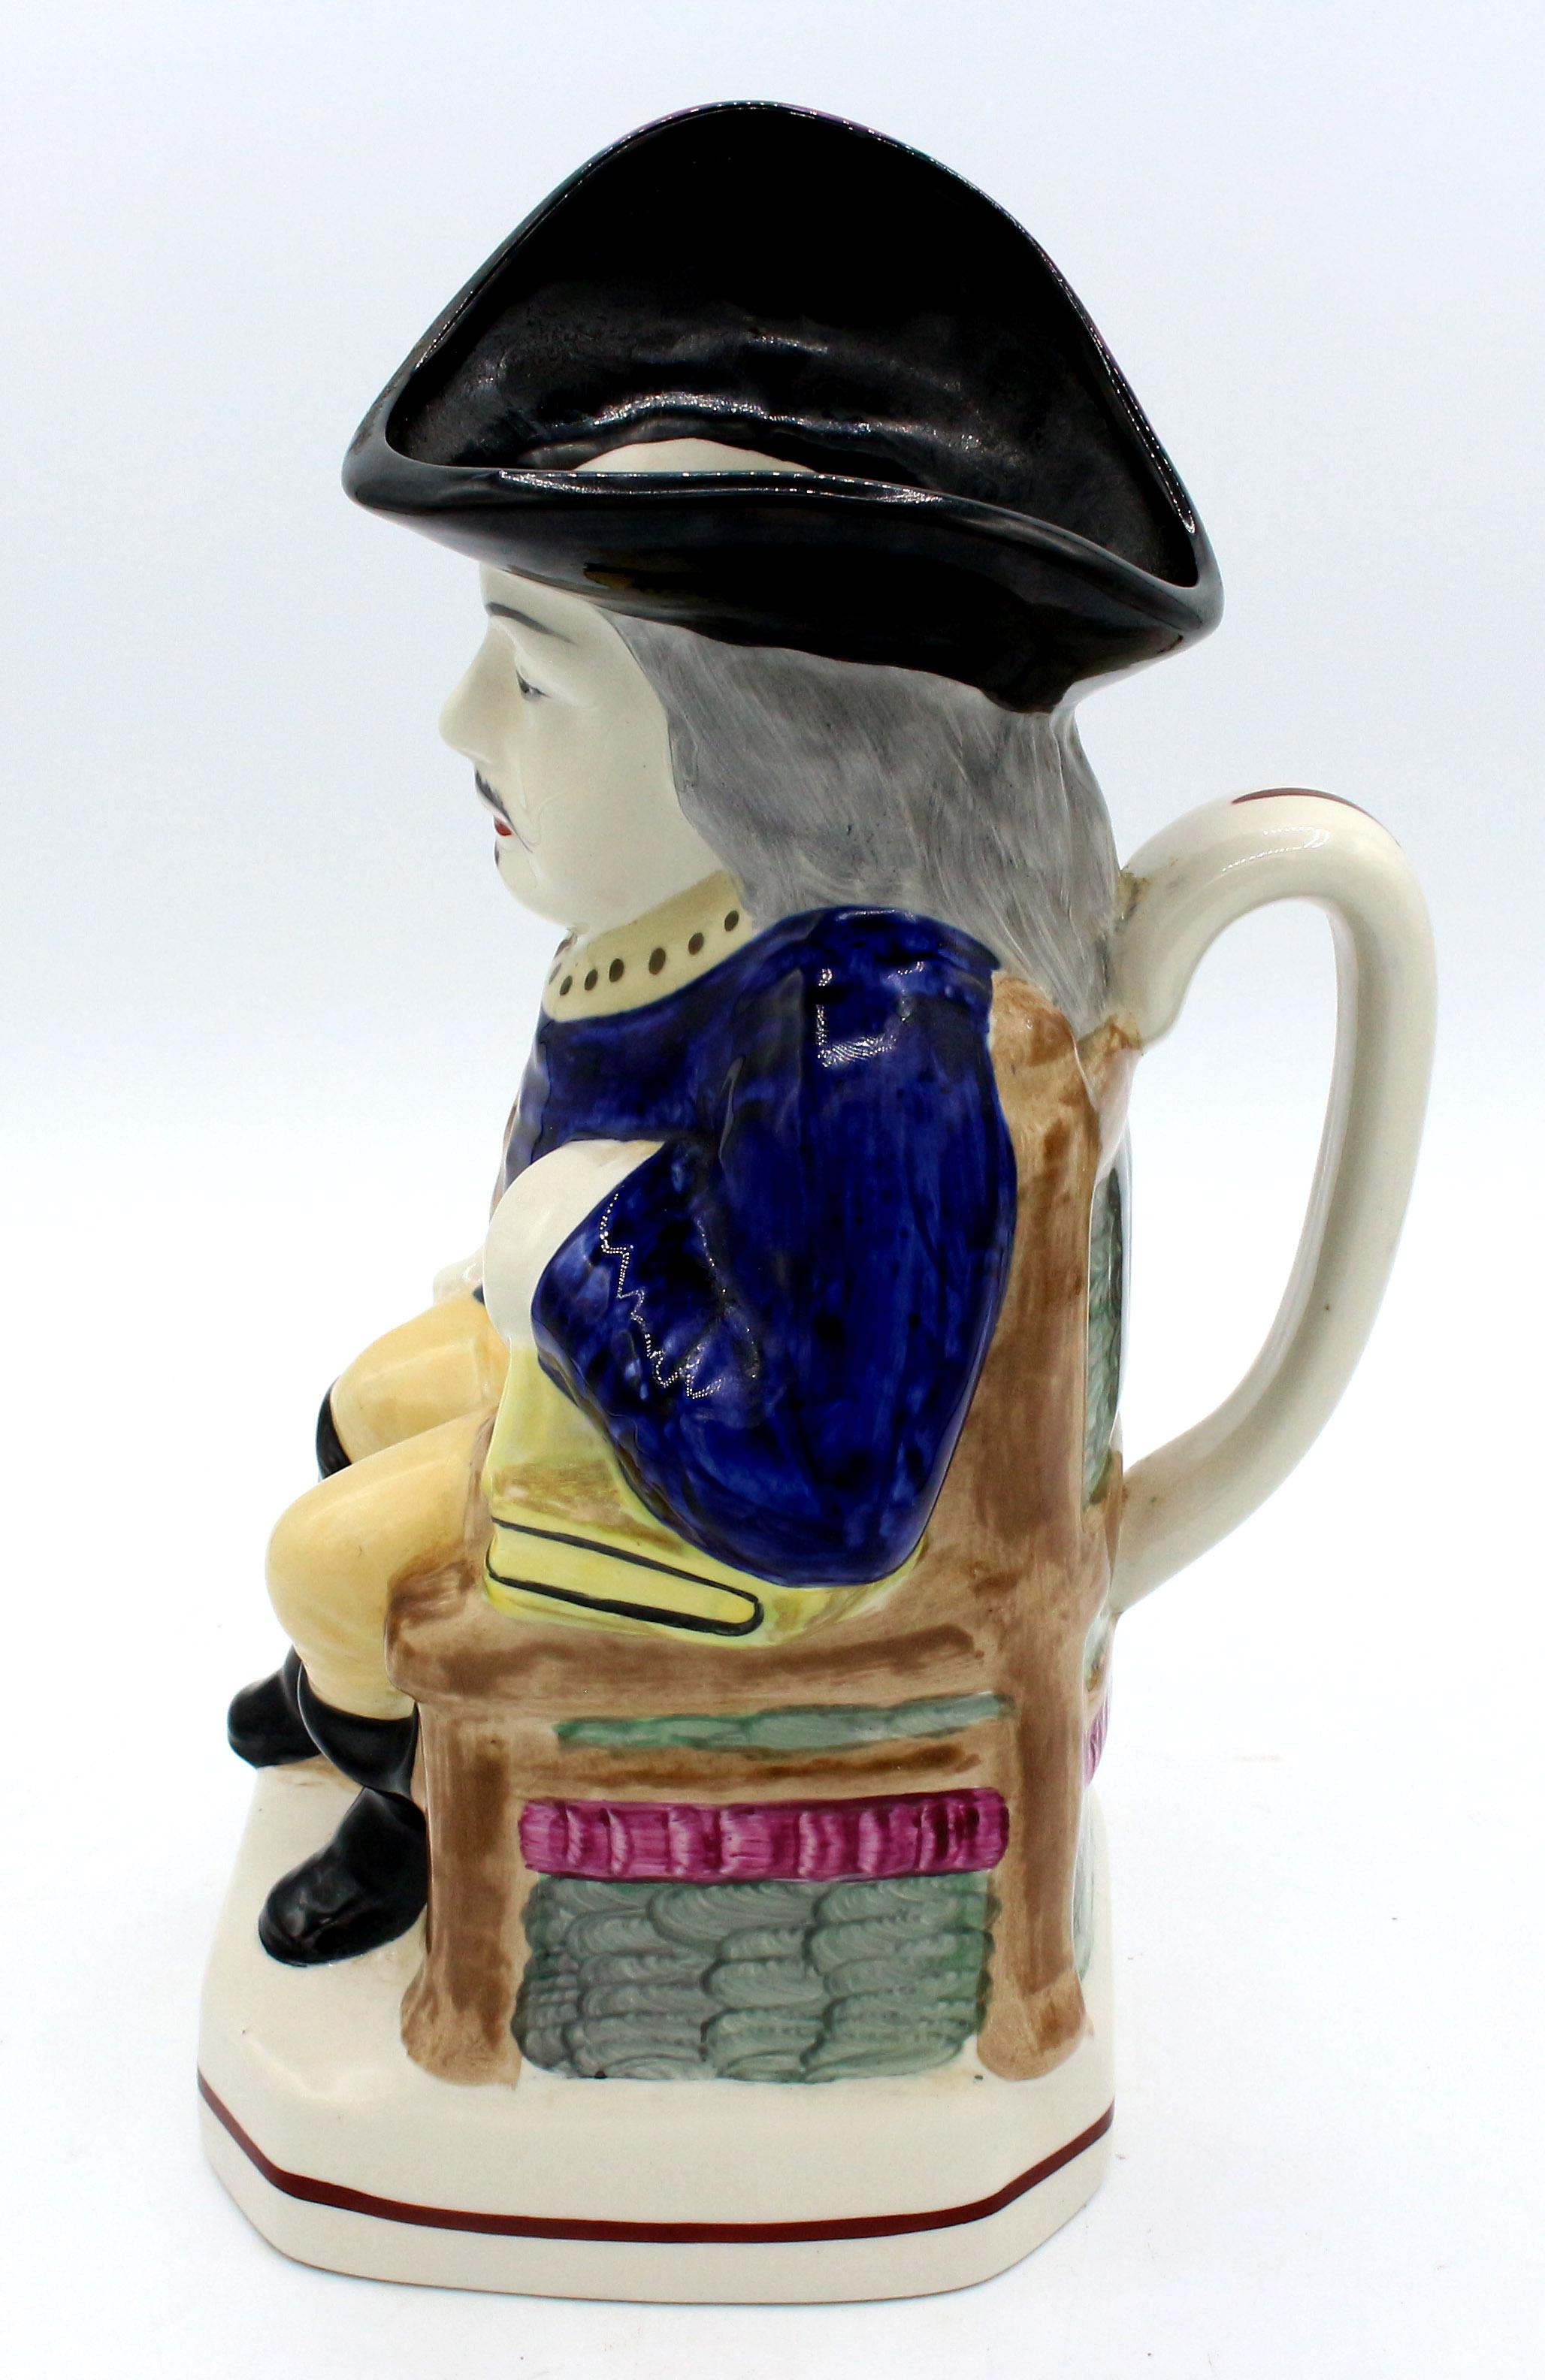 A Cavalier Toby Jug by William Kent, circa 1900, Staffordshire, England. The Cavalier in 17th century garb. Kent produced copies of period Staffordshire figures & originals. The pink feather edging the hat is a great touch. He is seated on a period